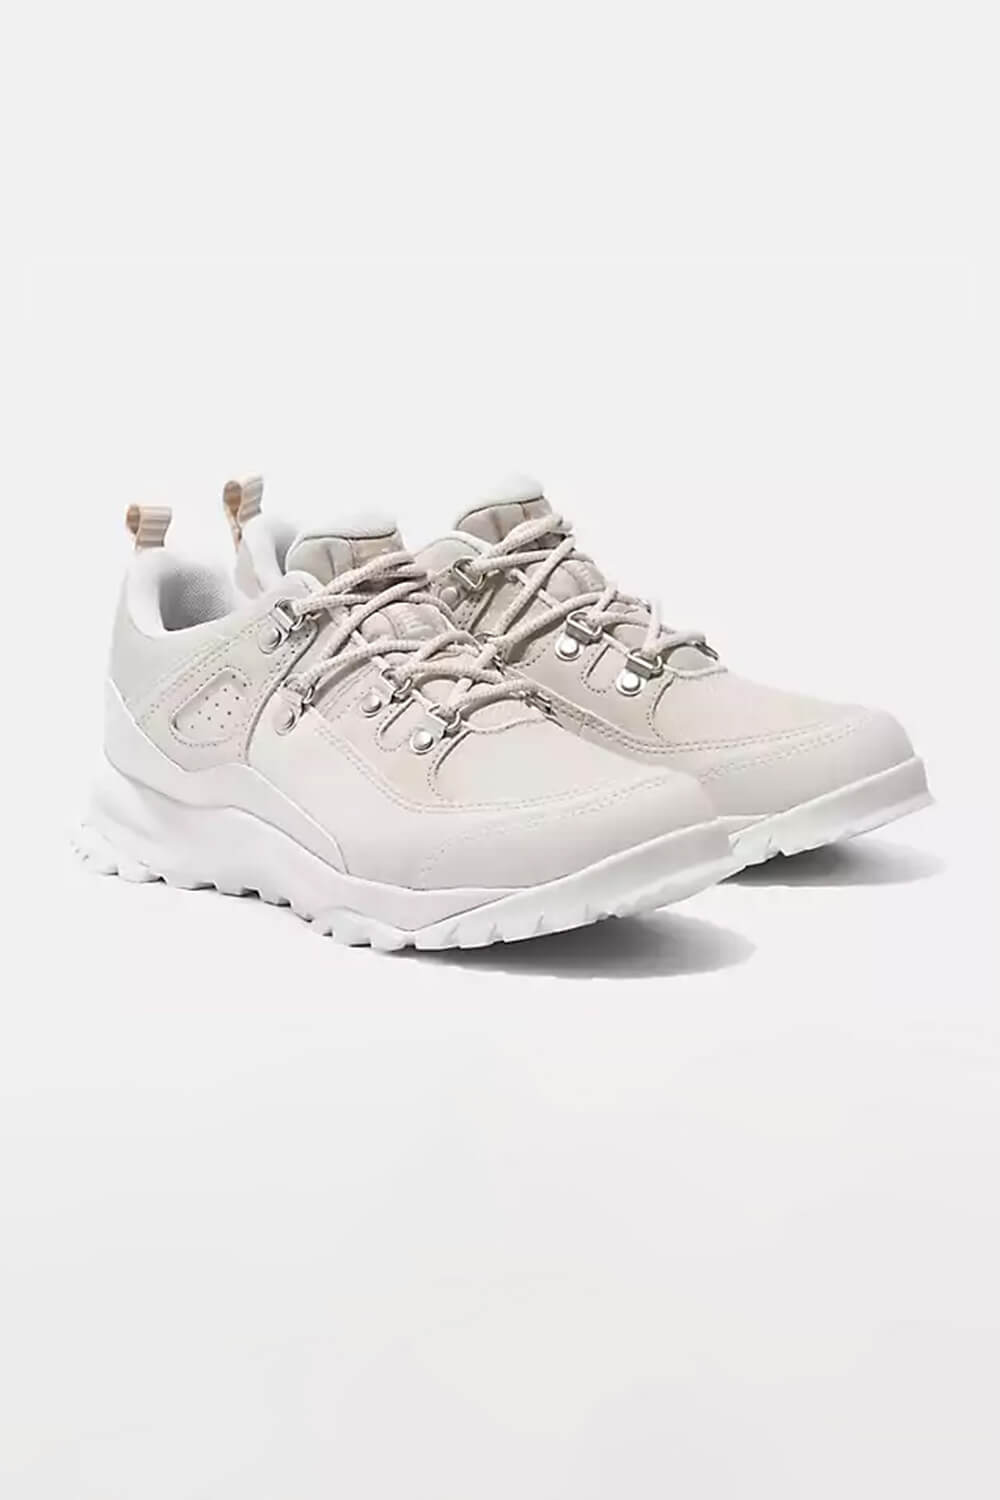 Timberland Lincoln Peak Sneakers for Women in White | TB0A6488EM1 